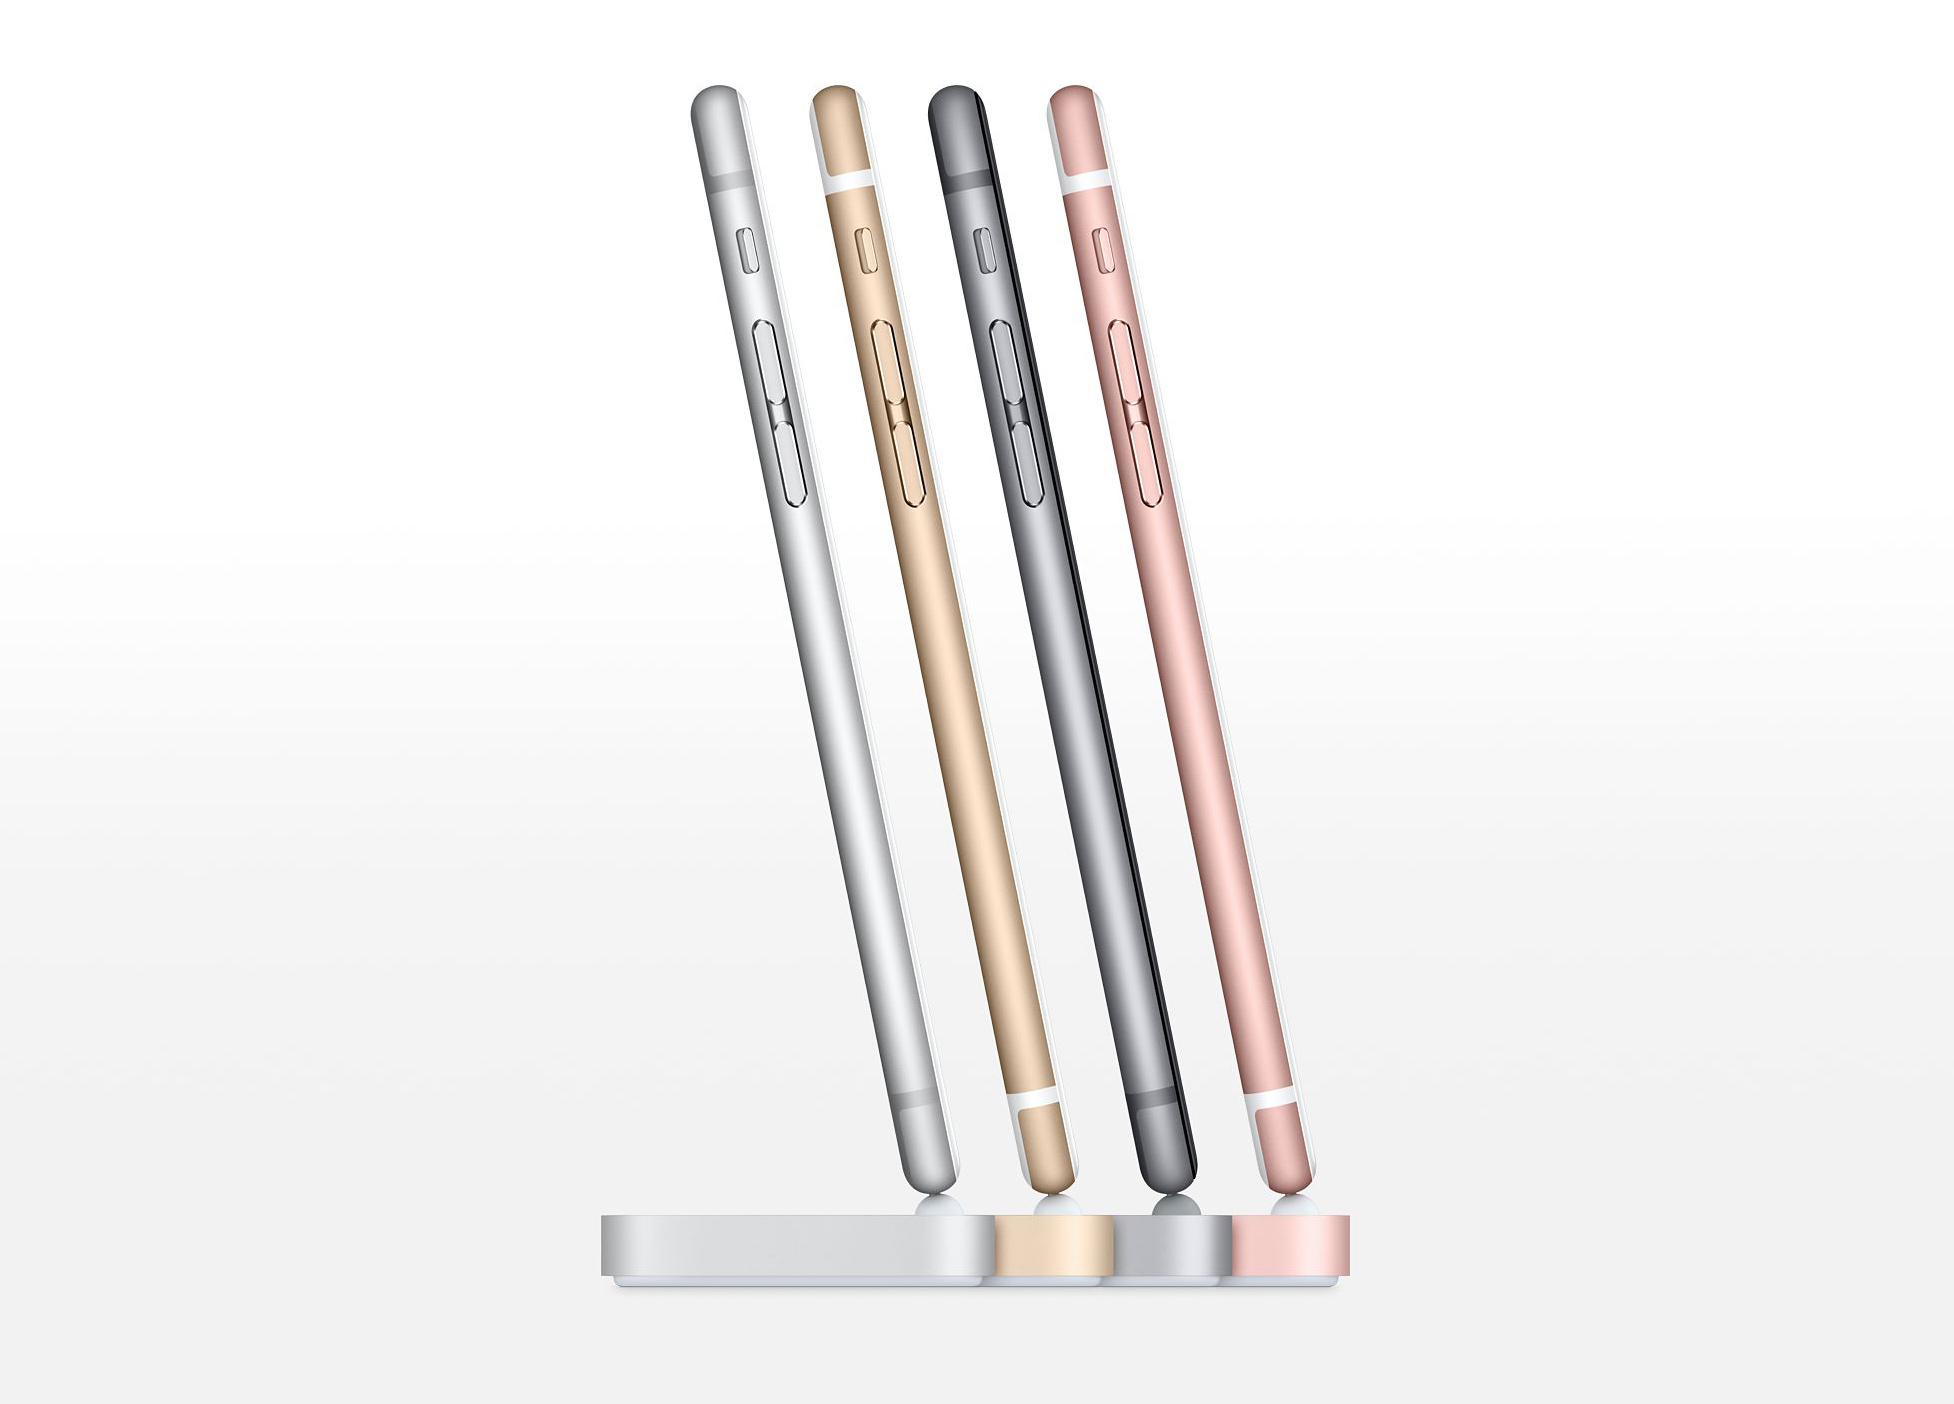 Here are the new Apple accessories for iPhones, iPads and Watches [atualizado 2x]